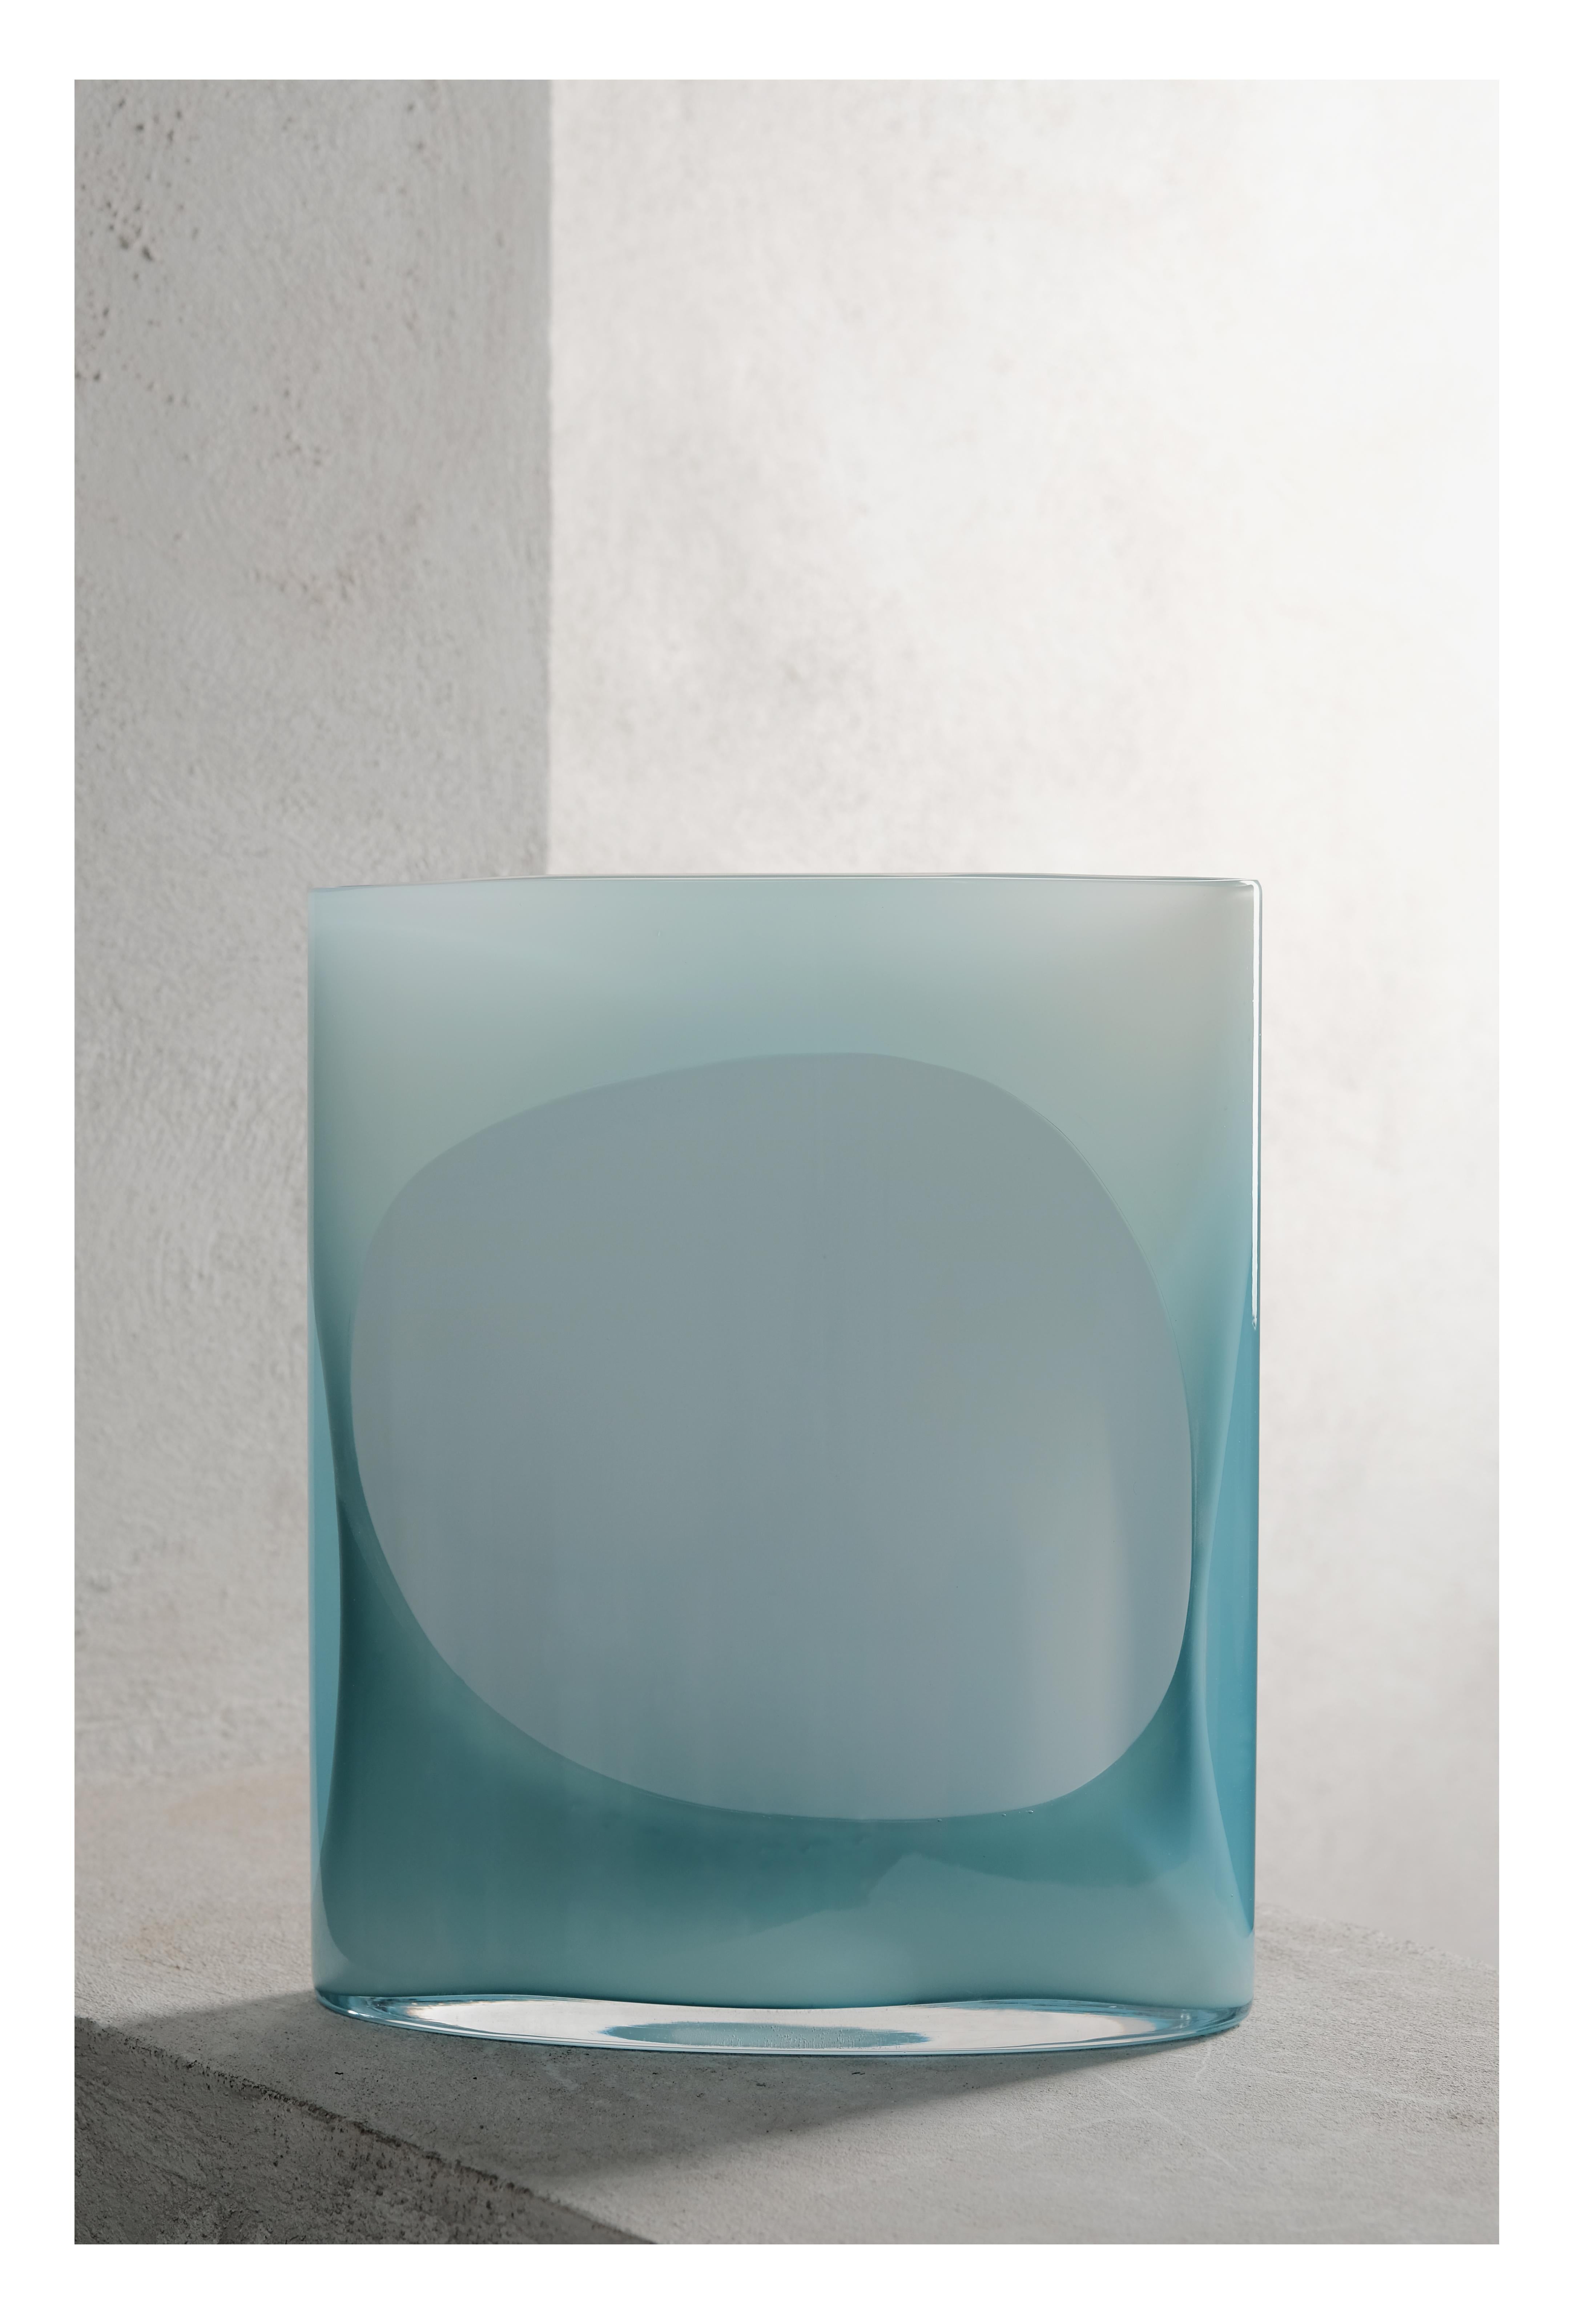 The result of a year-long collaboration between the Swiss-French designer and Nouvel Studio, Isla explores the juxtaposition of myriad hues and glass transparencies through two different vase sizes. The simplicity of the design accentuates the